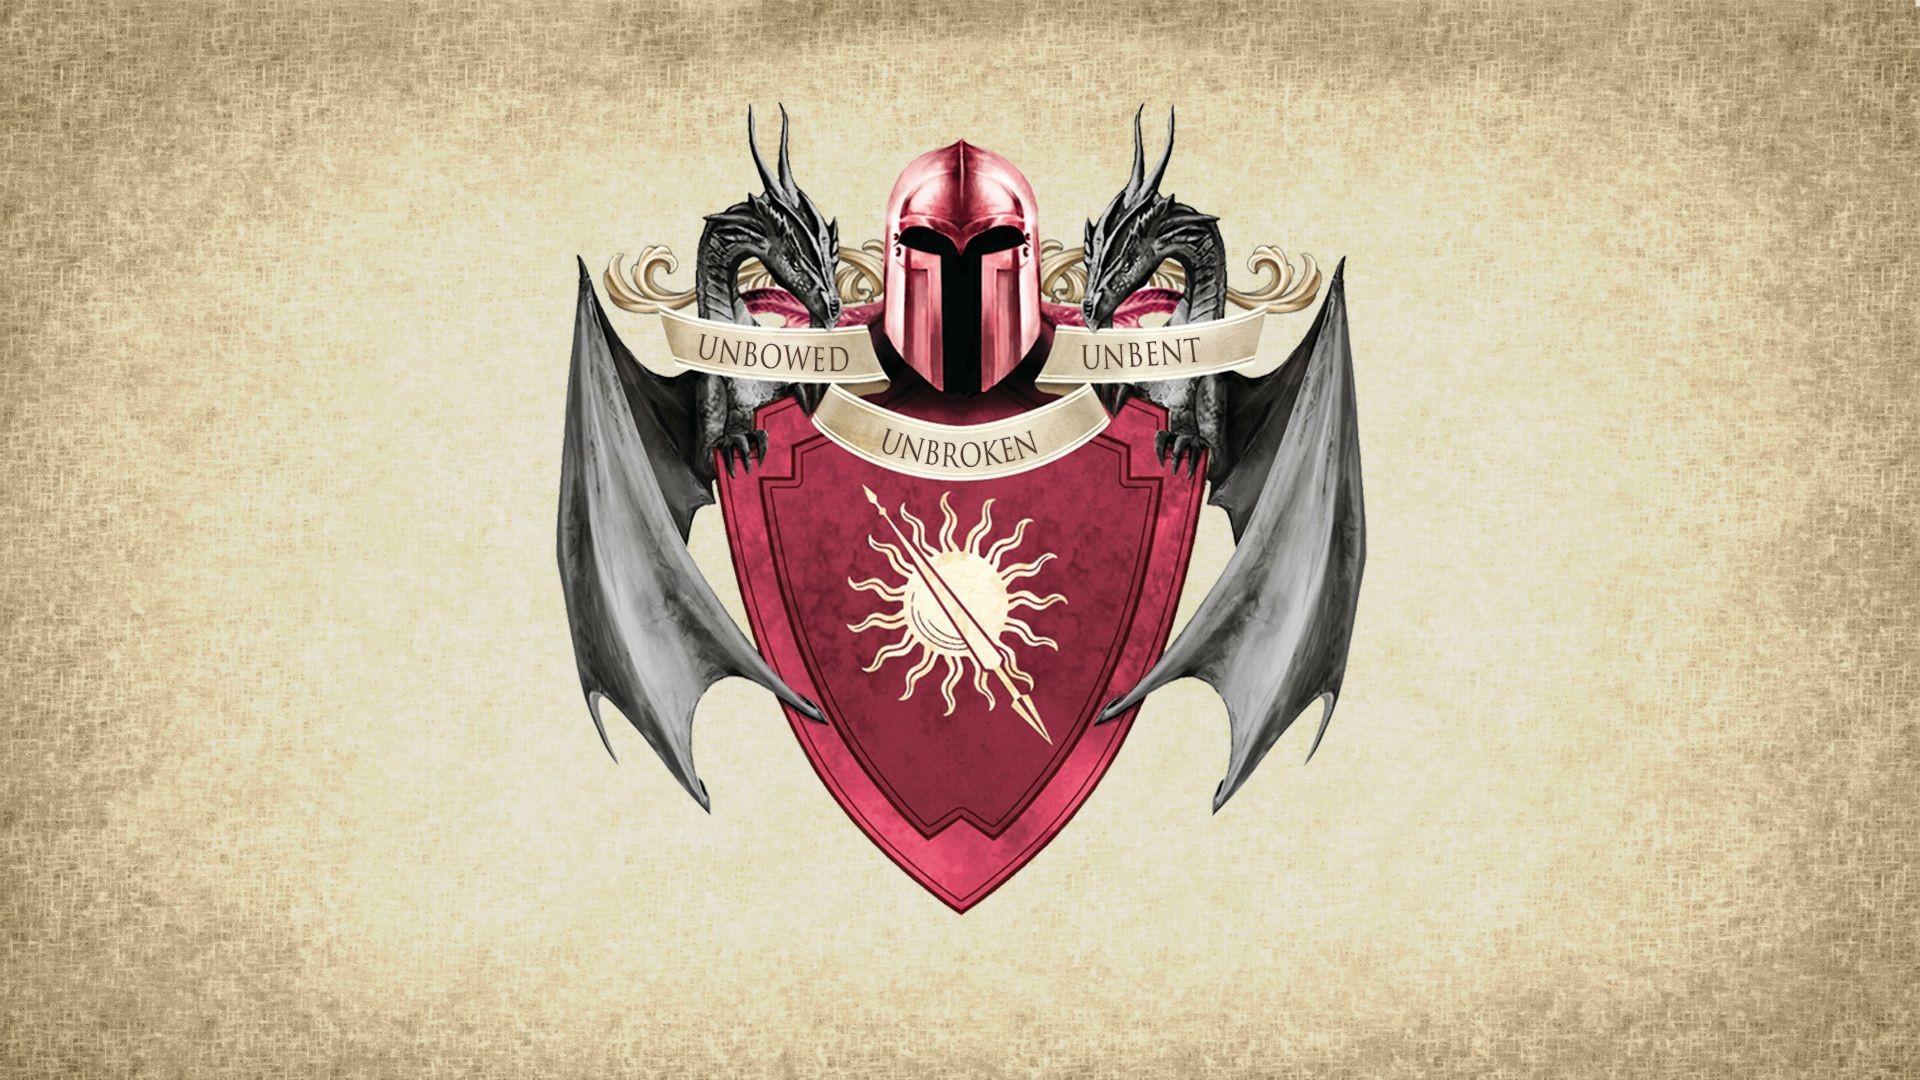 Game of Thrones: Coat of Arms wallpaper (1920x1080)